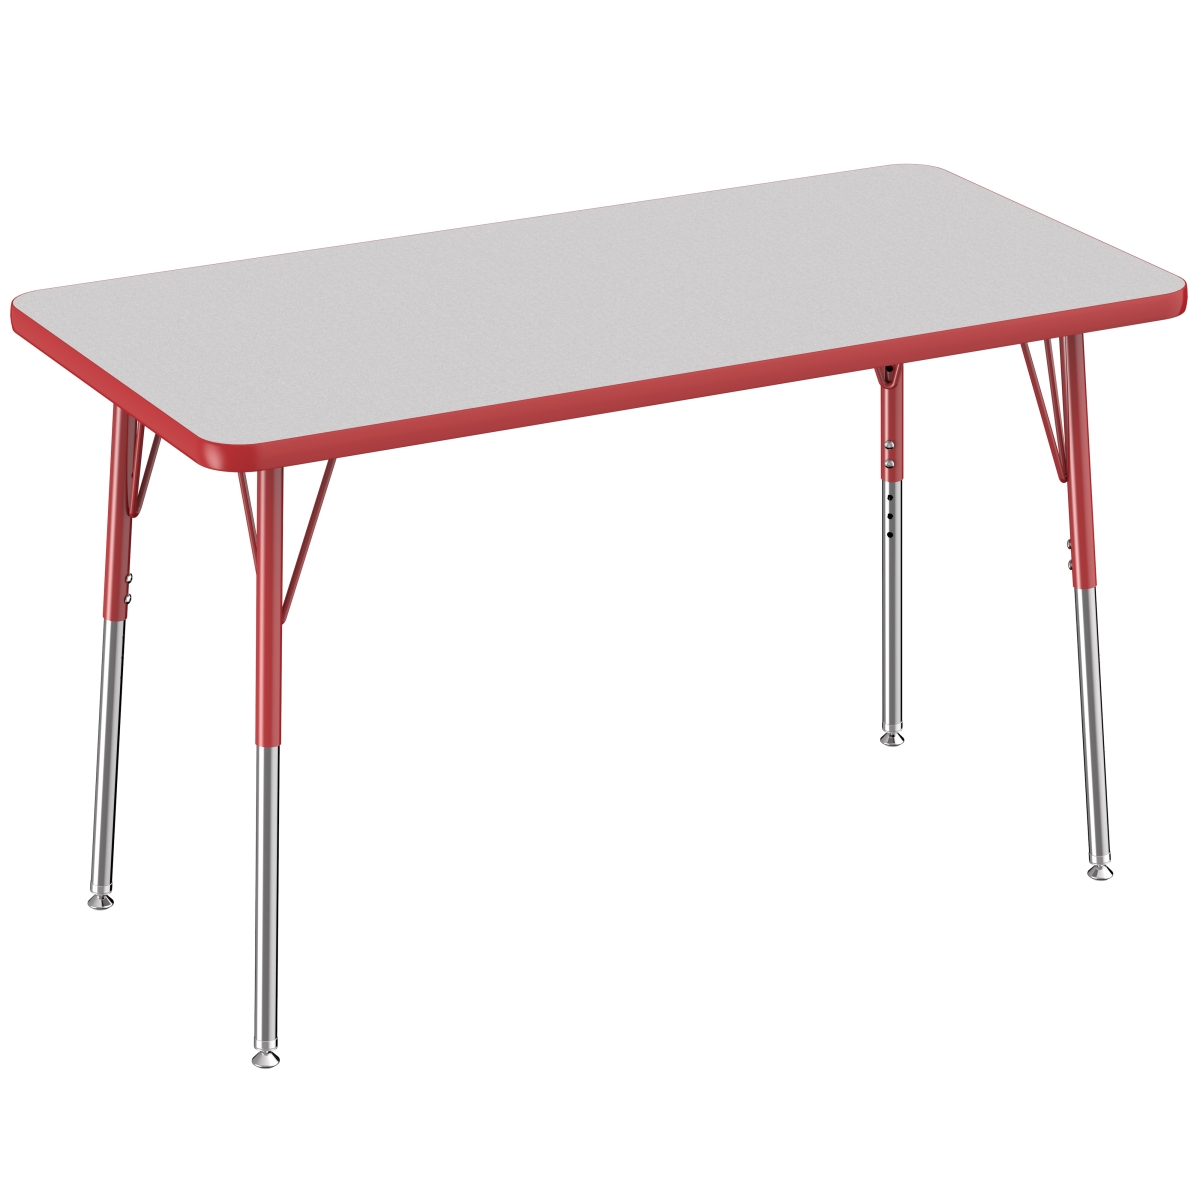 10007-gyrd 24 X 48 In. Rectangle T-mold Adjustable Activity Table With Standard Swivel - Grey & Red